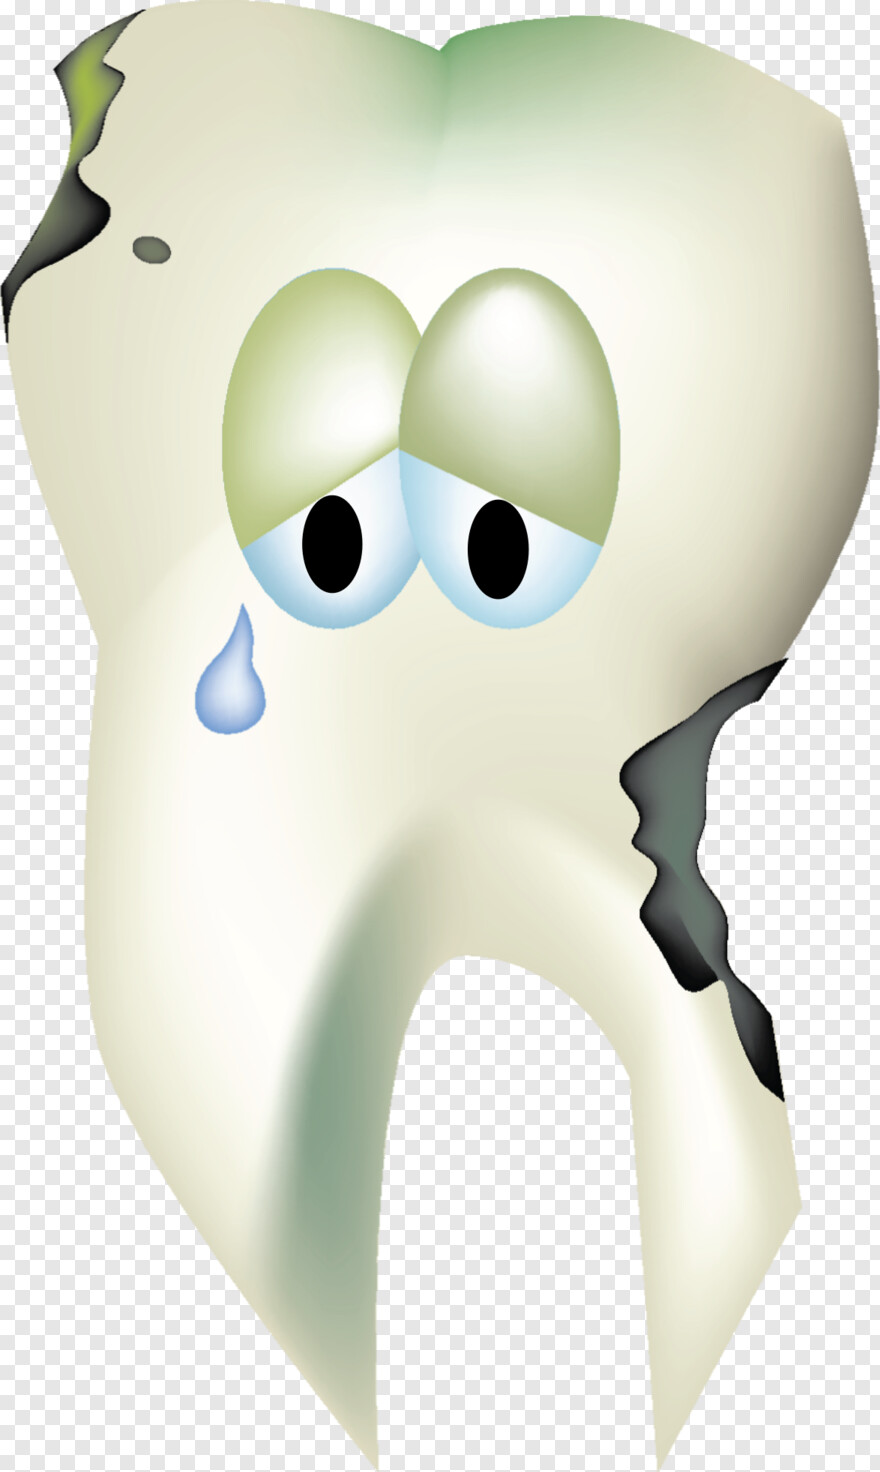  Tooth Icon, Tooth Brush, Tooth, Out Of Stock, Tooth Clipart, Tooth Outline